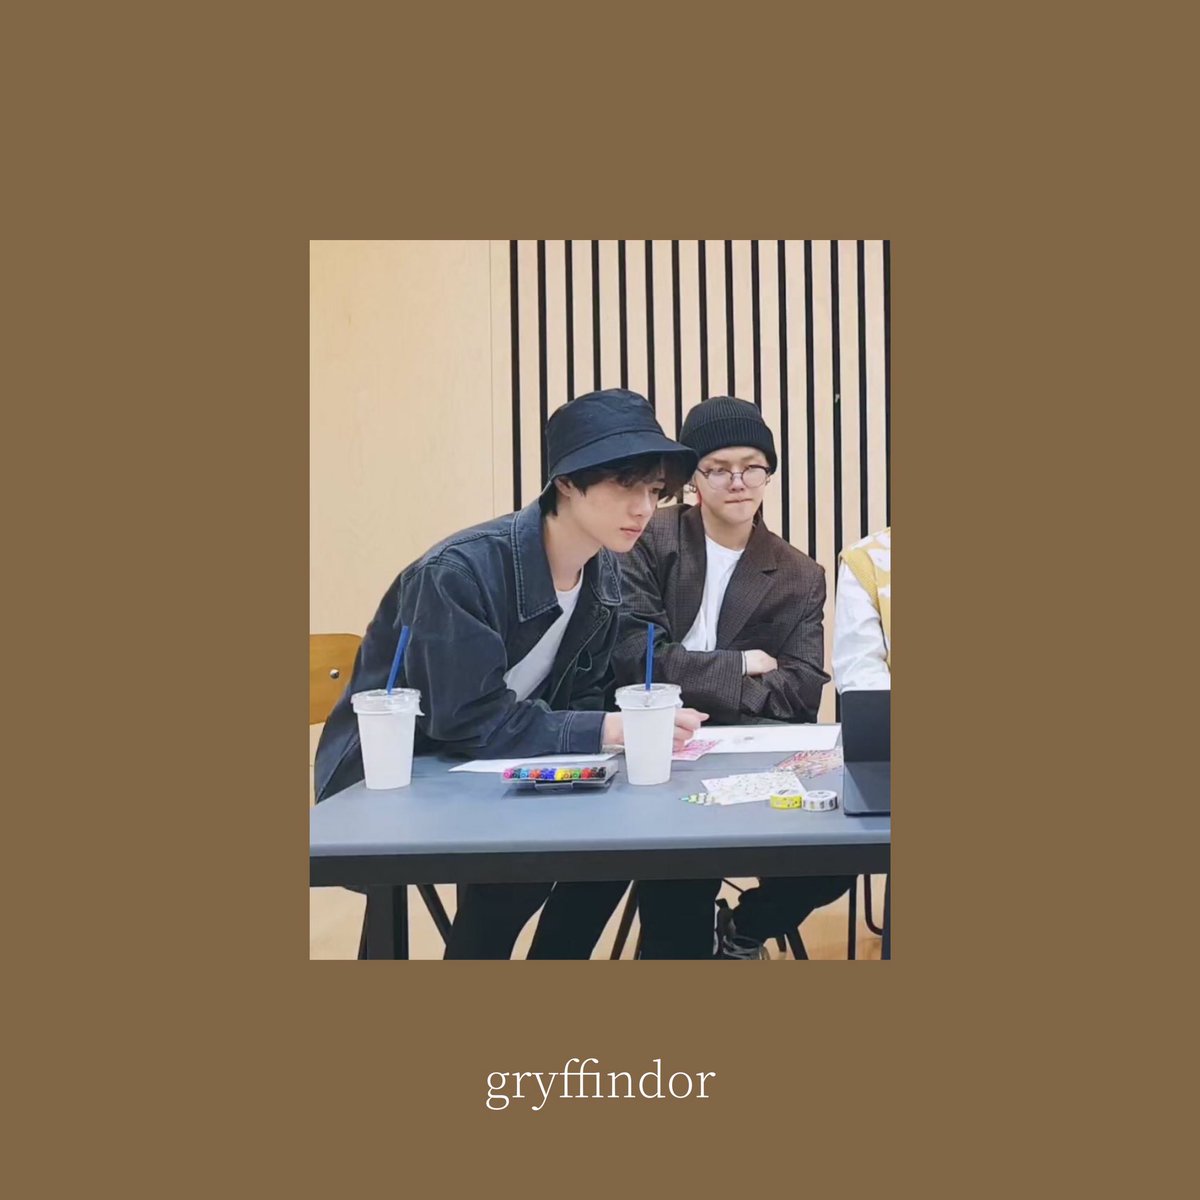 beomgyu and yeonjun for gryffindor ~The Gryffindor house emphasises the traits of courage as well as "daring, nerve, and chivalry," and thus its members are generally regarded as brave, though sometimes to the point of recklessness.